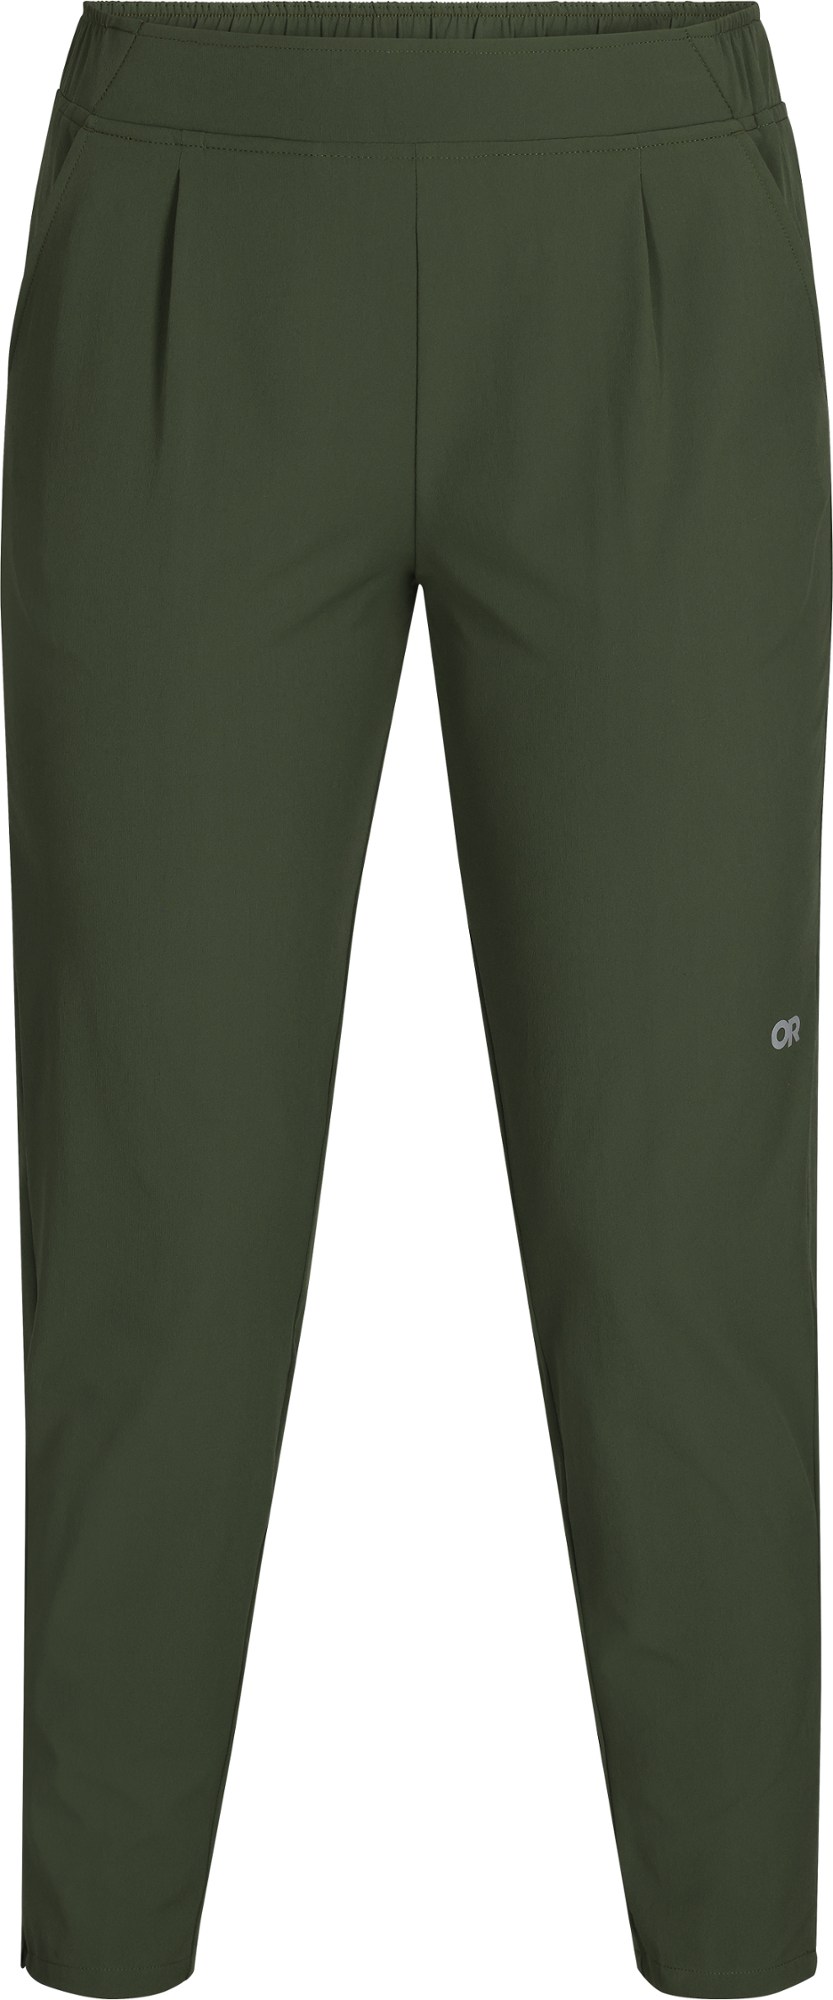 Women's Trousers For Travelling